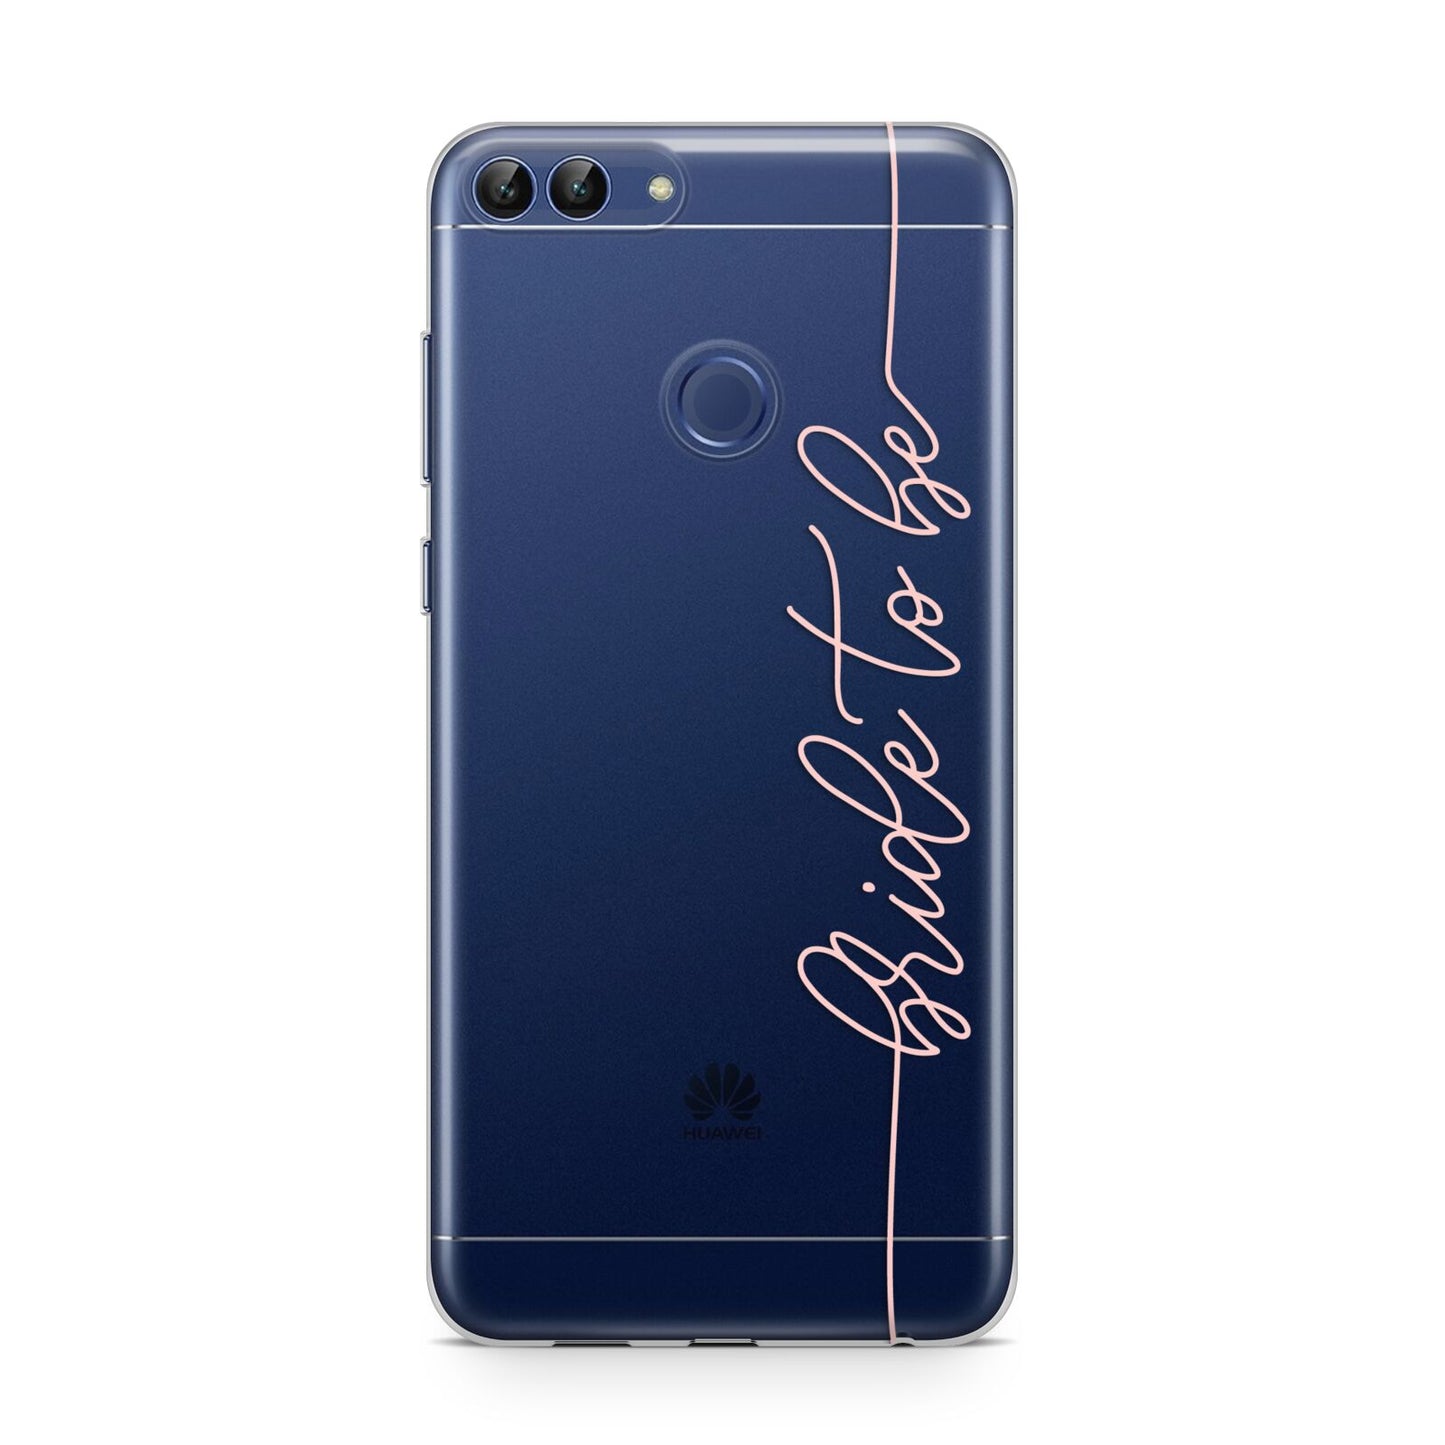 Bride To Be Huawei P Smart Case